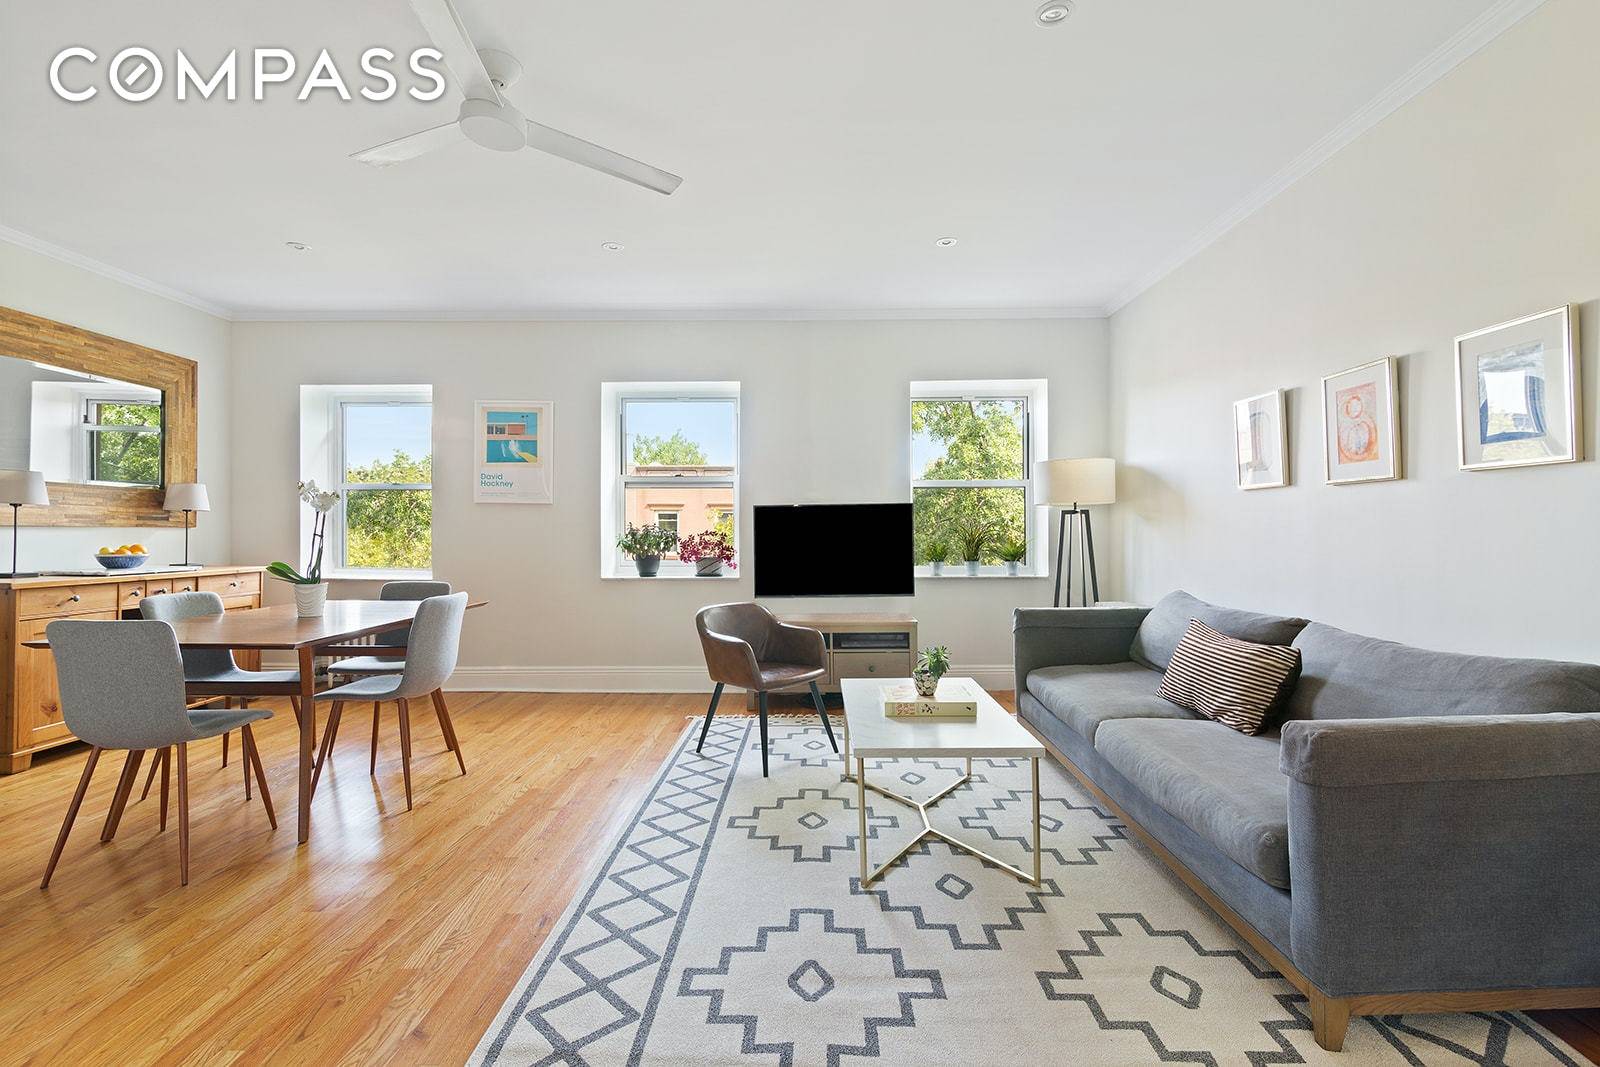 PRIVATE ROOF DECK ! Mint Condition, 2 bed 1 bath home with a private roof deck and working, wood burning fireplace, ideally located in prime Carroll Gardens.